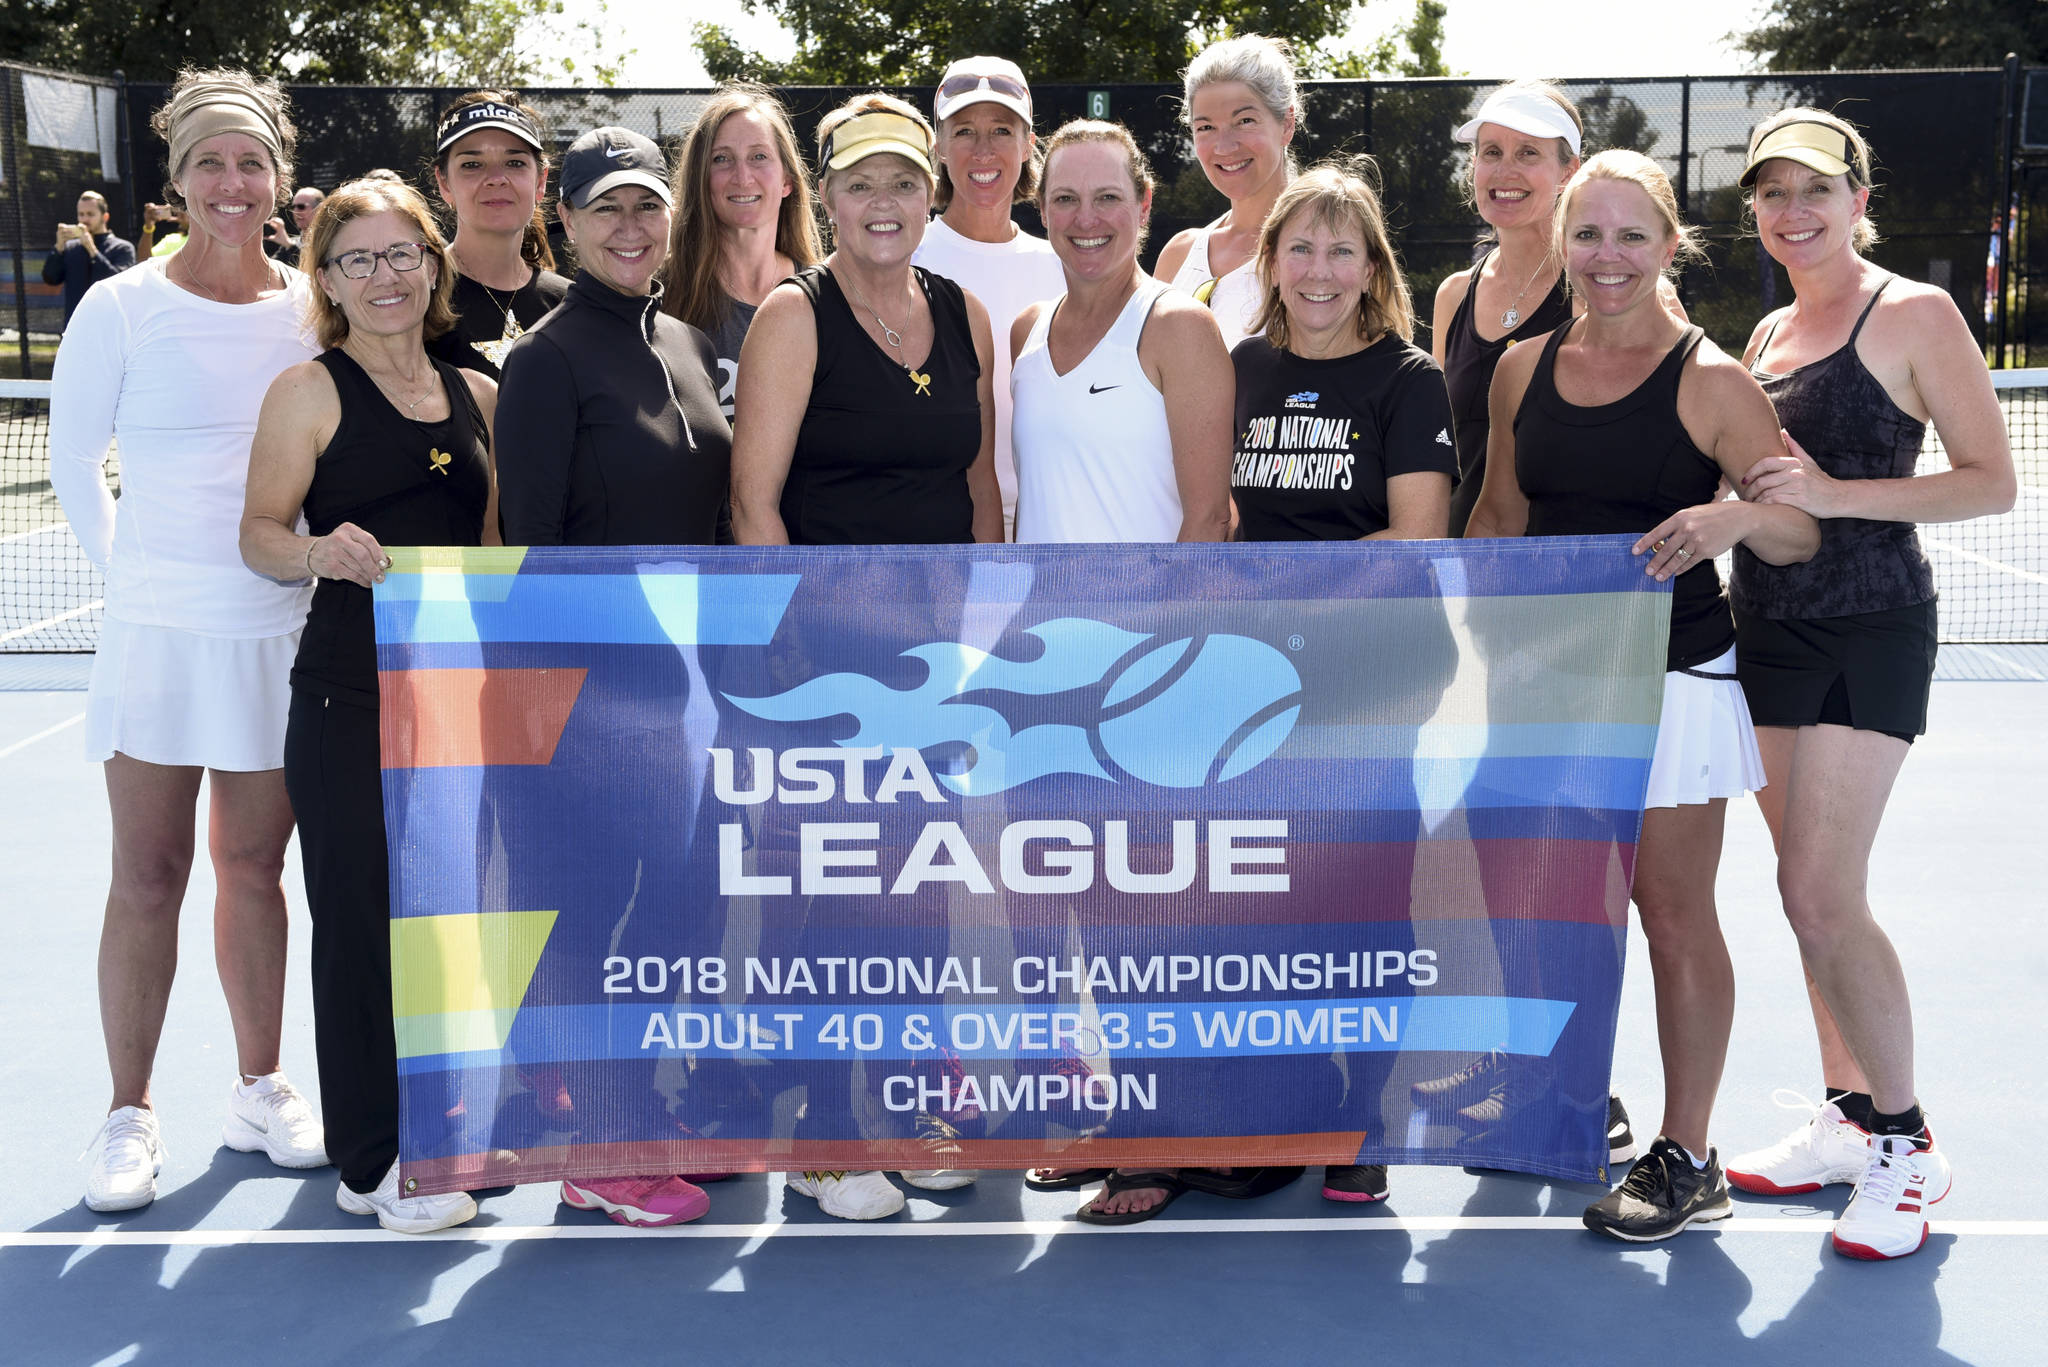 A Mercer Island-based women’s tennis team, which represented the United States Tennis Association Pacific Northwest section, earned a national title at the USTA League Adult 40 Over 3.5 National Championships on Oct. 21 at the Arlington Tennis Center in Arlington, Texas. The Mercer Island team defeated a Cornelius, North Carolina squad 3-2 in the championship match. Members of the championship roster included Carol Gregory, Nancy Smith, Susie Harrington, Diane Panteleakos, Cindy Paborsky, Suzy Skone, Heidi Martin, Hilary Benson, Molly Fort, Ildi Koves, Shawn Wood, Kelly Everson and Leigh Perks. Photo courtesy of Andrew Ong/USTA